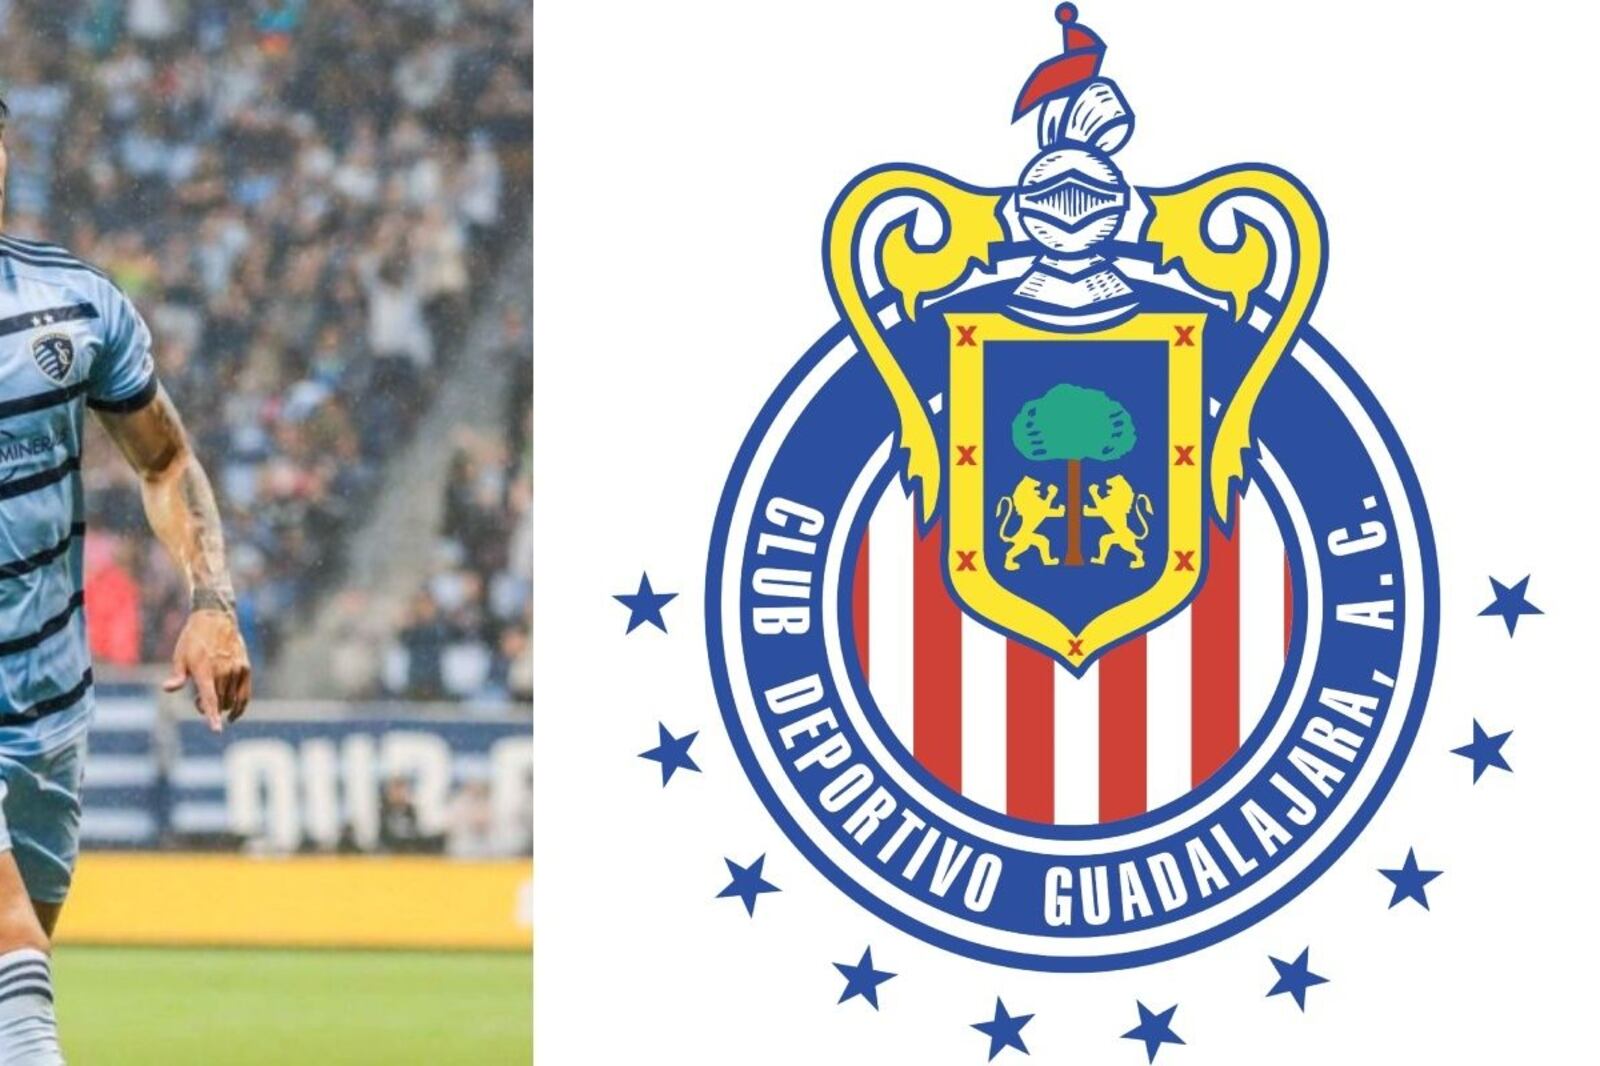 Goodbye Chivas, the demands that Alan Pulido asks to sign with the club